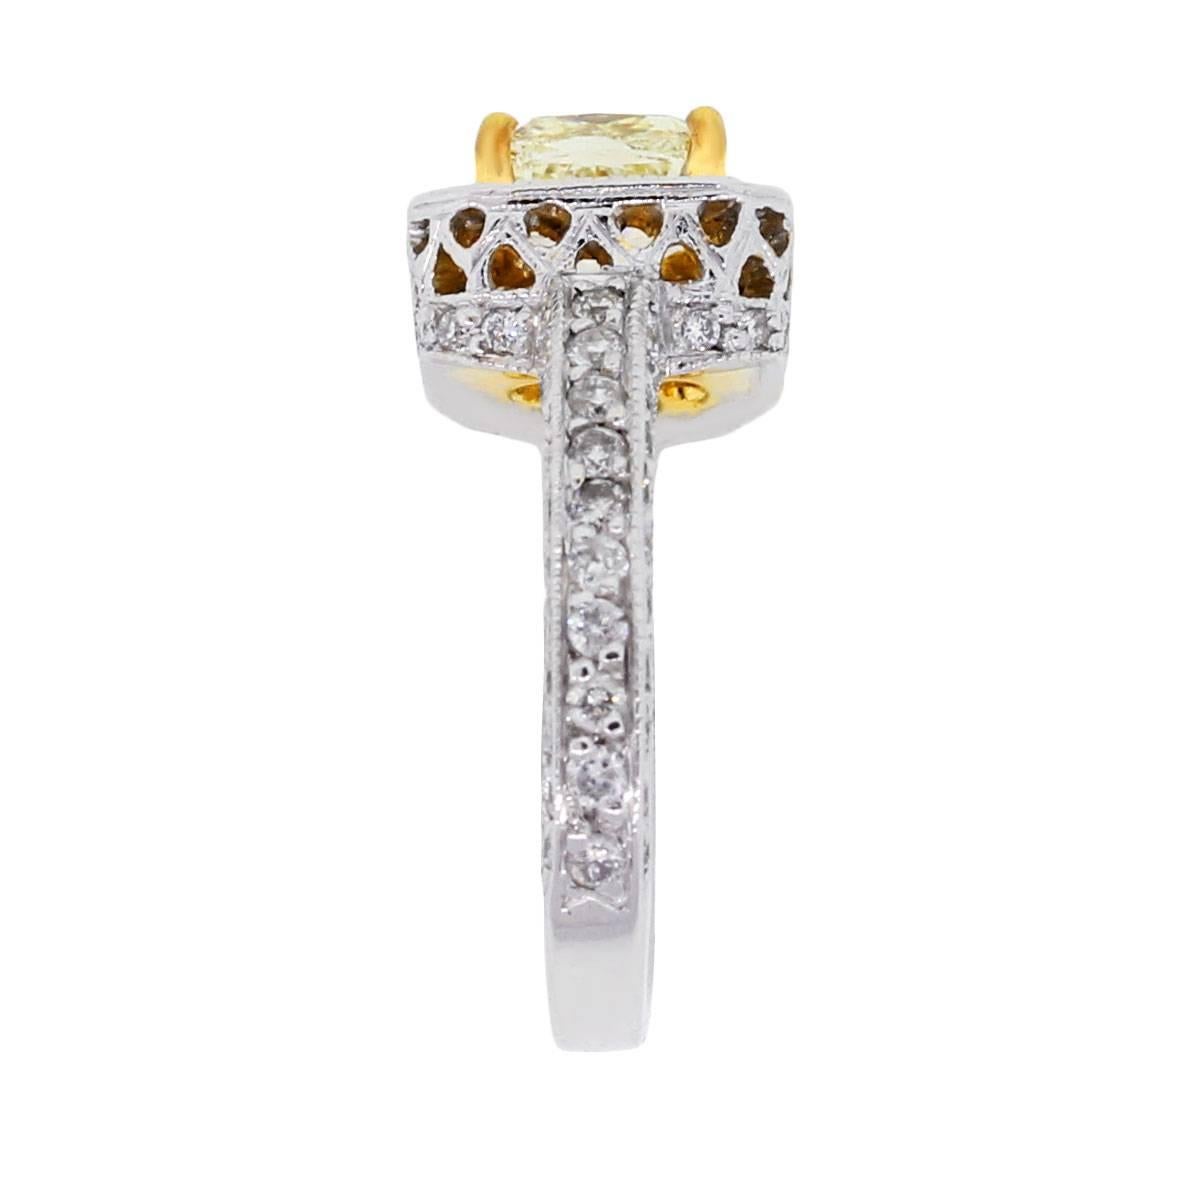 Material: 18k white and yellow gold
Center Diamond Details: Approximately 1.61ct fancy yellow cushion cut diamond. Diamond is yellow in color and SI1 in clarity
Diamond Details: Approximately 1ctw of round brilliant diamonds. Diamonds are G/H in